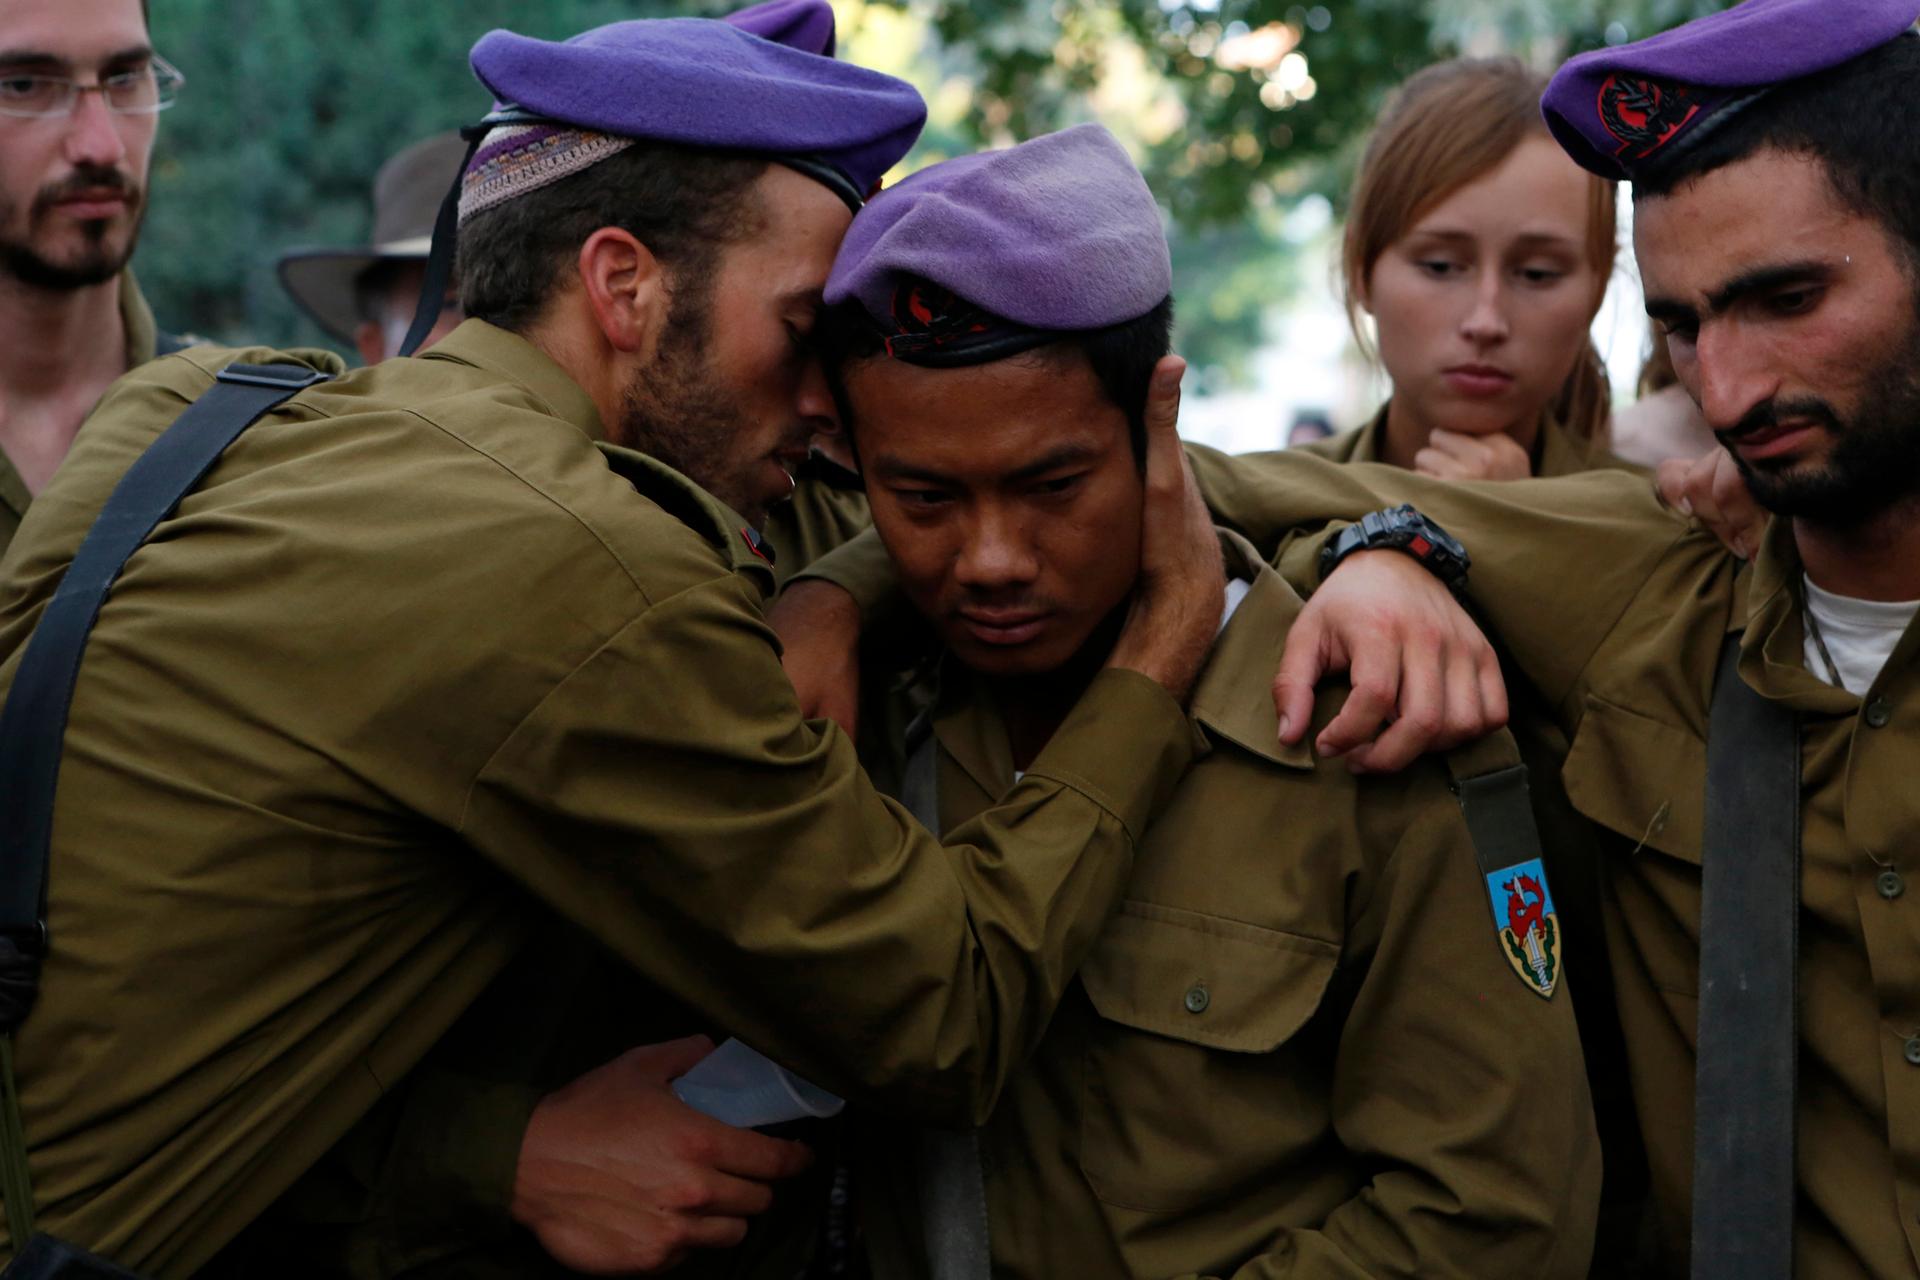 Israeli soldiers mourn during the funeral of their comrade Lieutenant Hadar Goldin in Kfar Saba, near Tel Aviv, on August 3, 2014. Goldin's death in Gaza is prompting some in Israel to question their military's controversial Hannibal Doctrine.